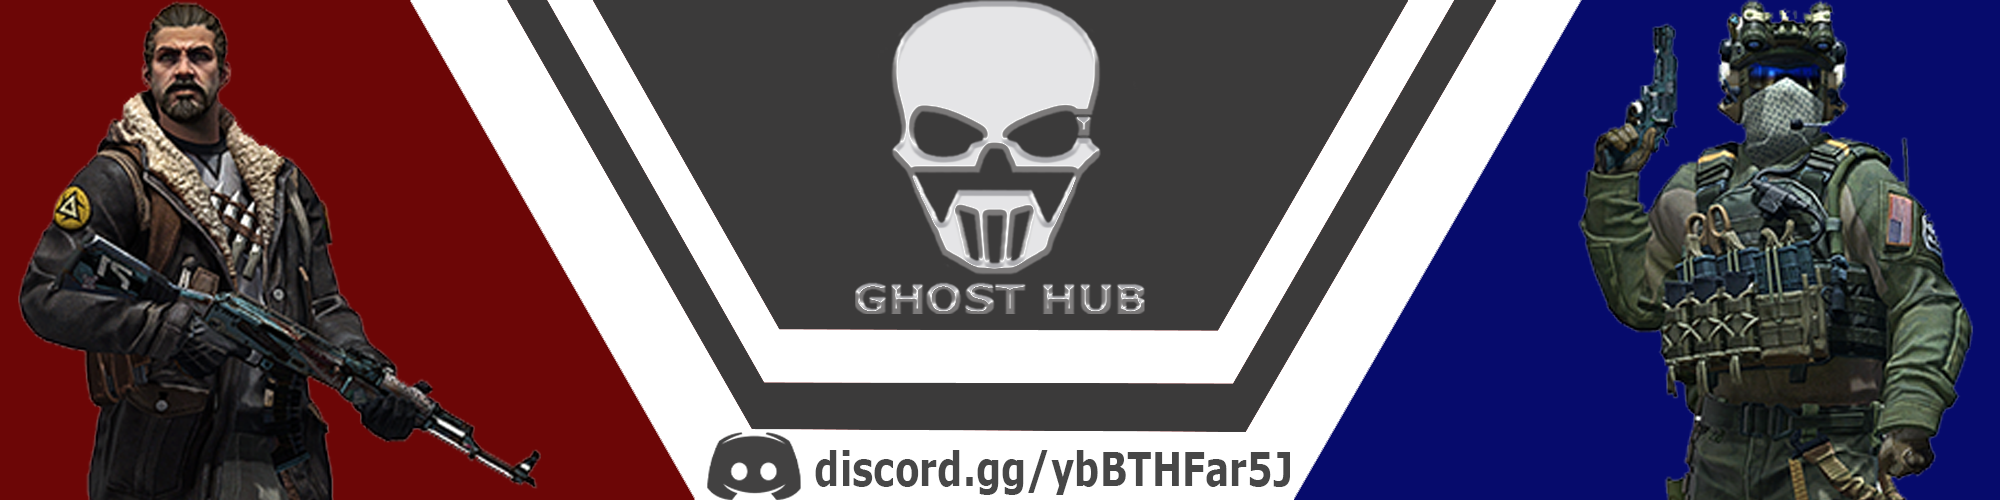 csgo_ghost_hub_background.png